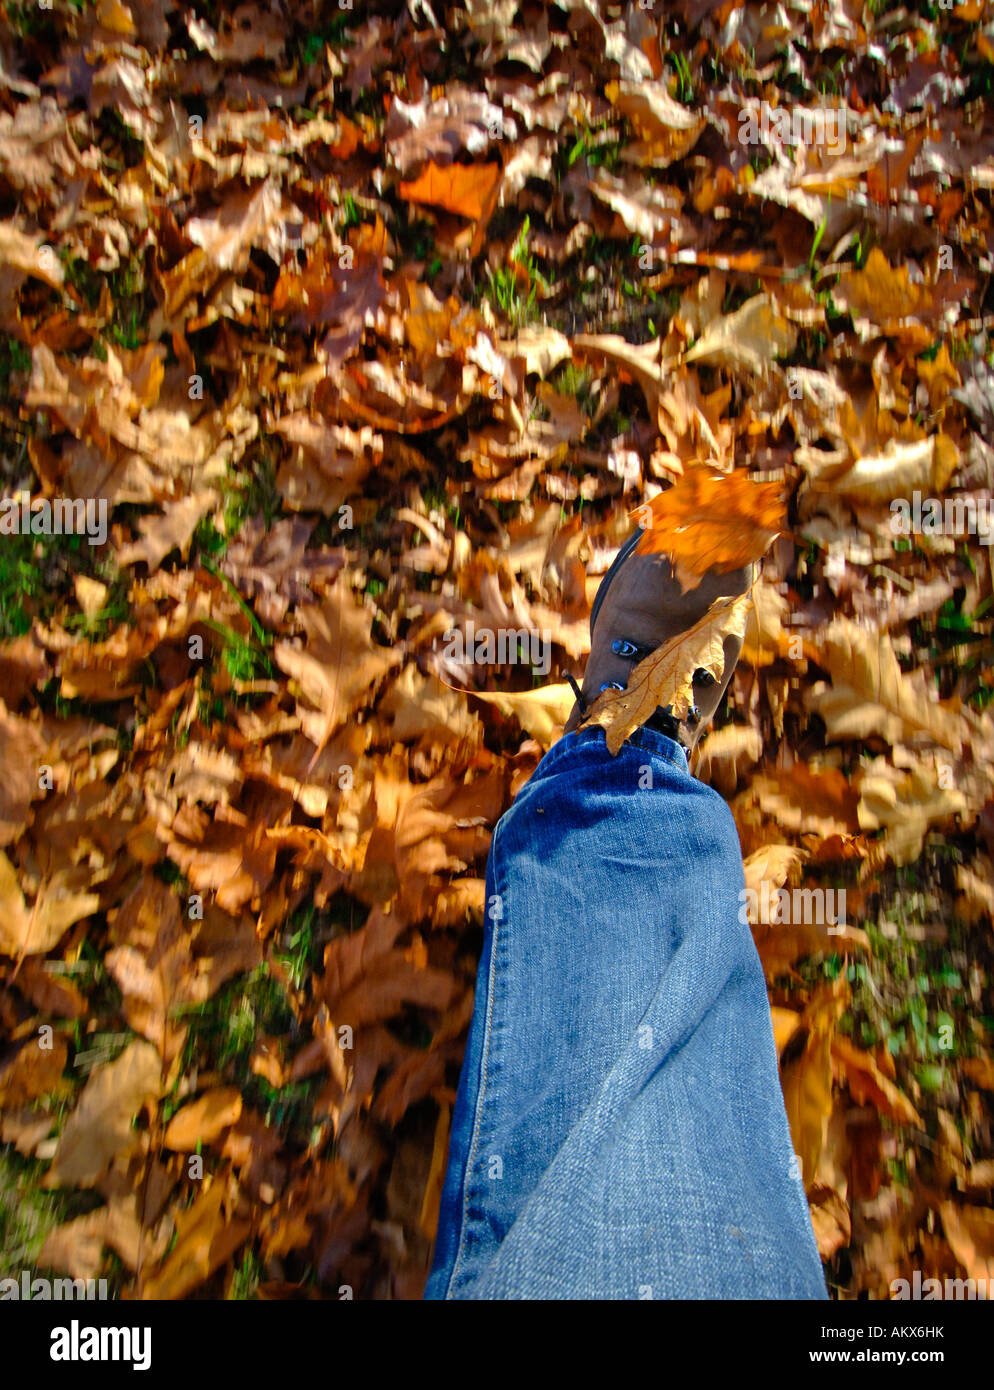 Kicking up leaves on a walk in the autumn countryside. Picture by Jim Holden. Stock Photo